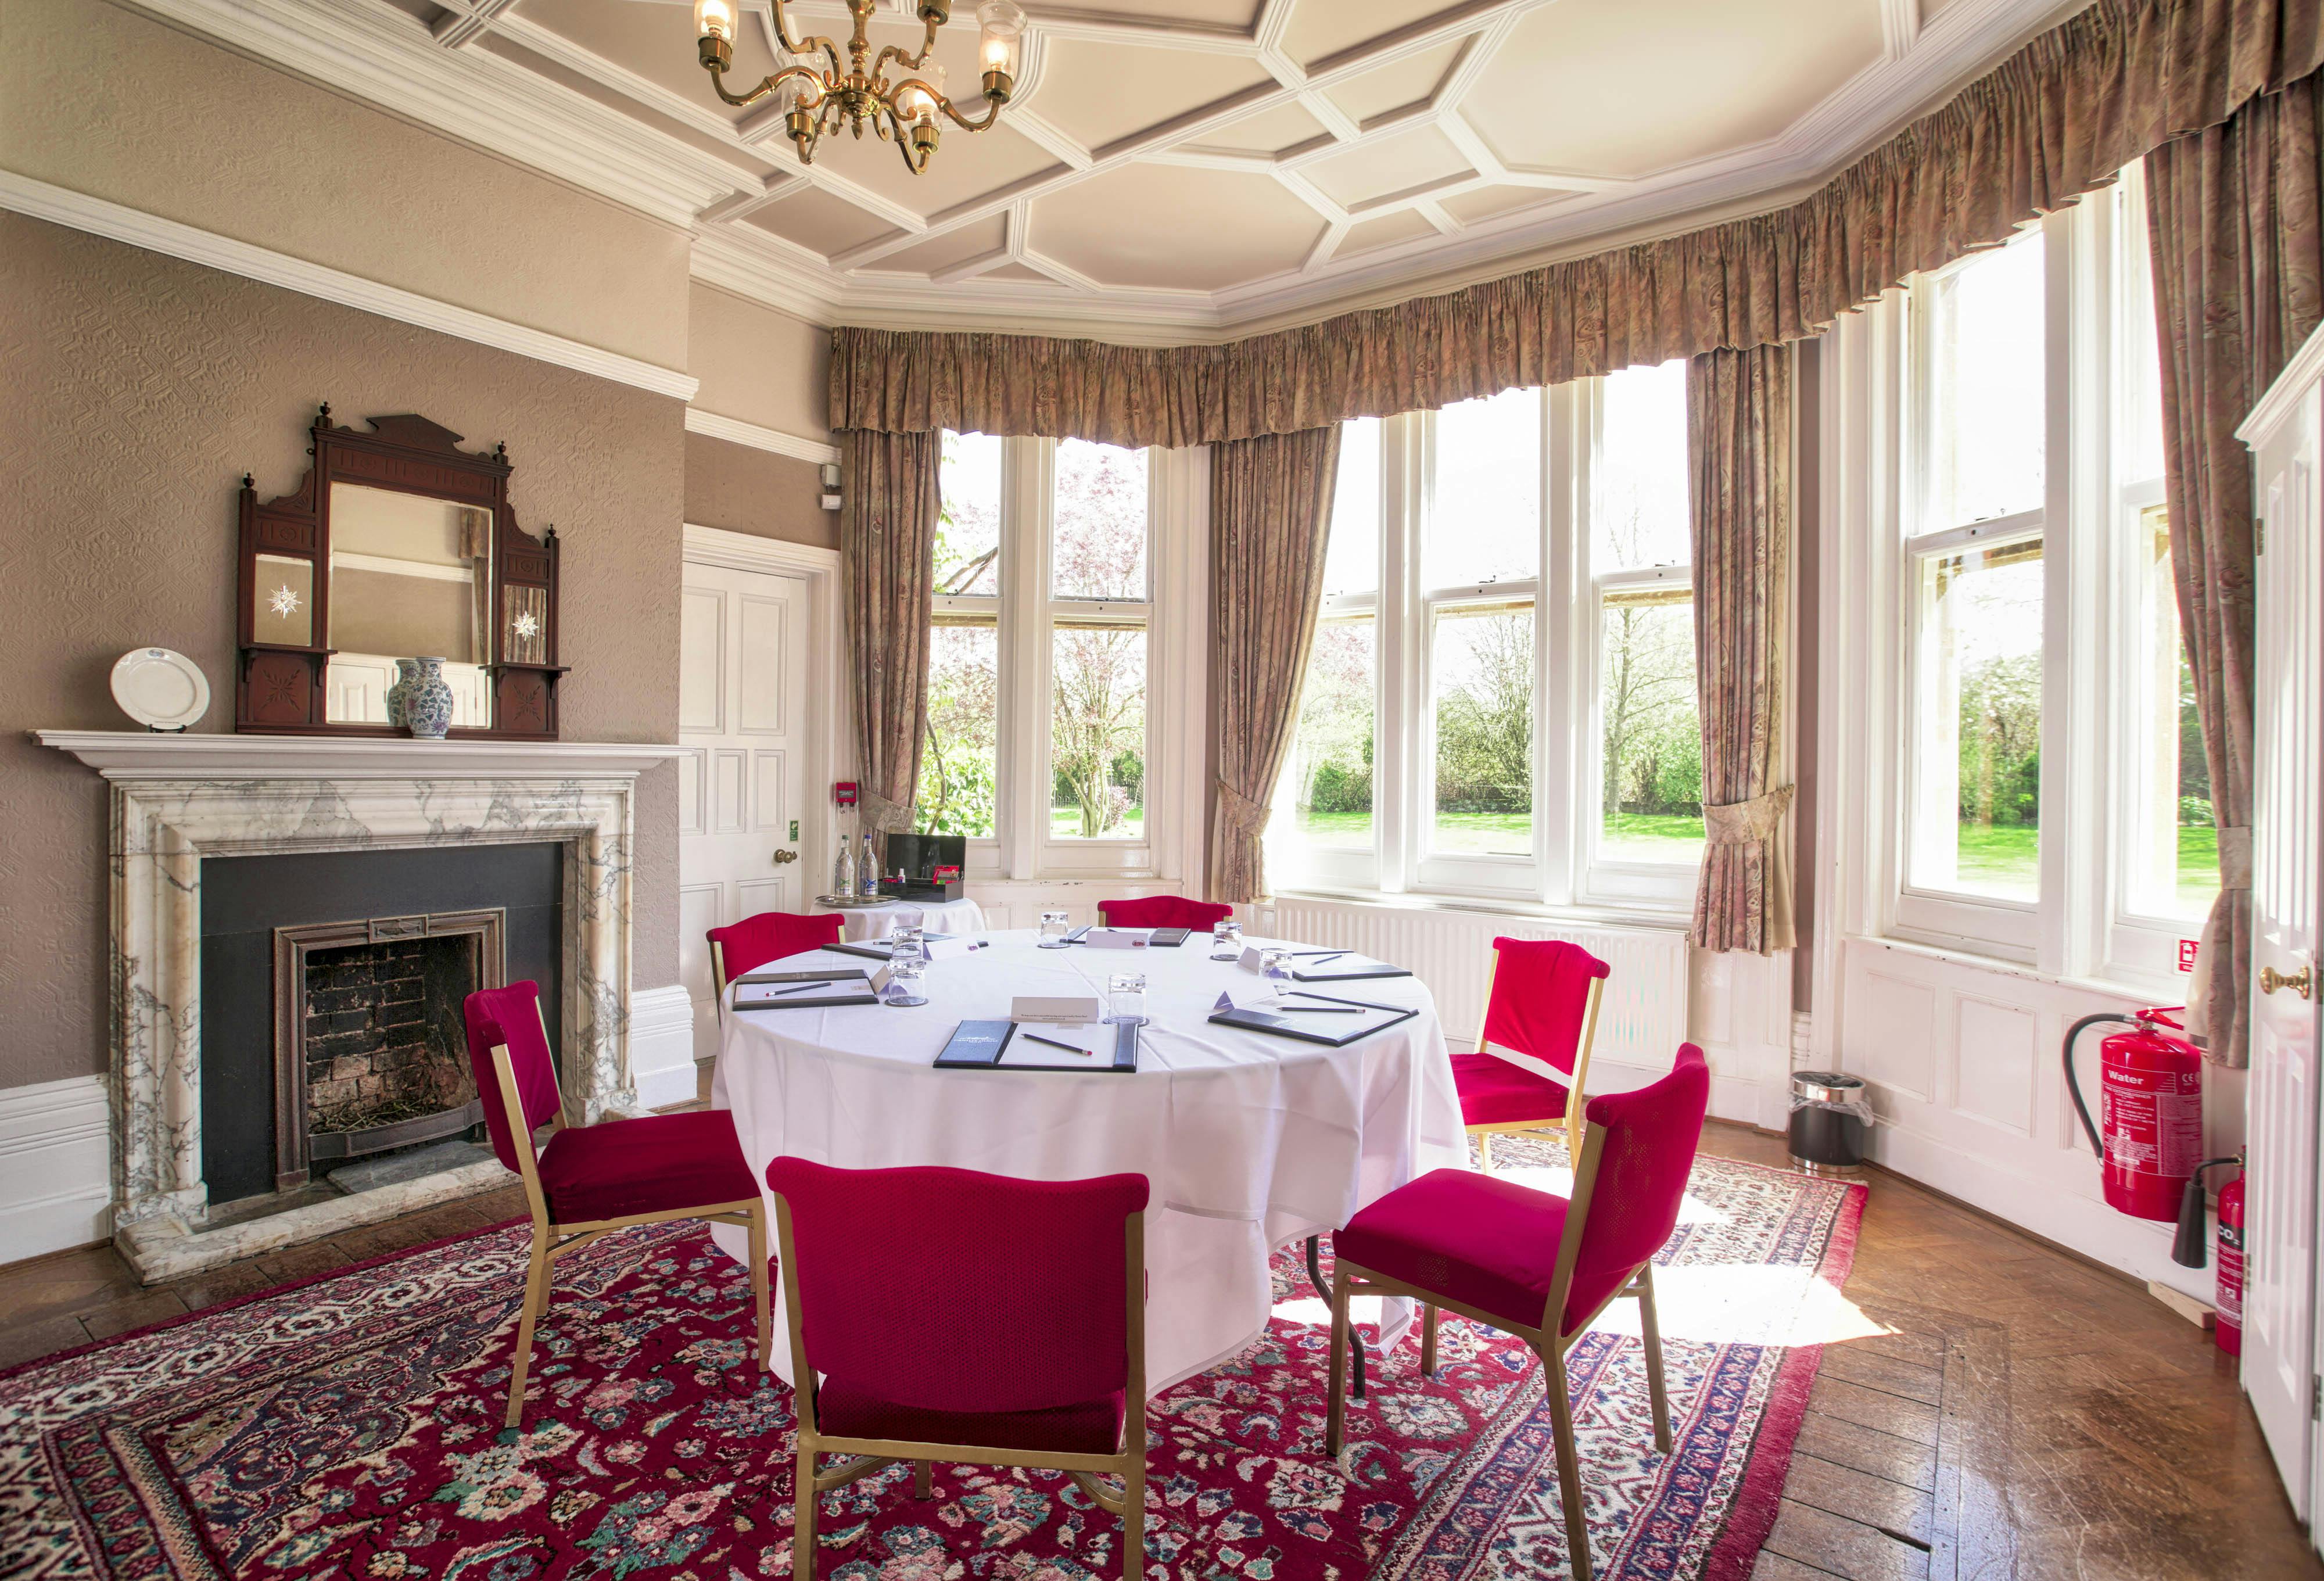 Meeting, Glebelands Room, Cantley House, stately home